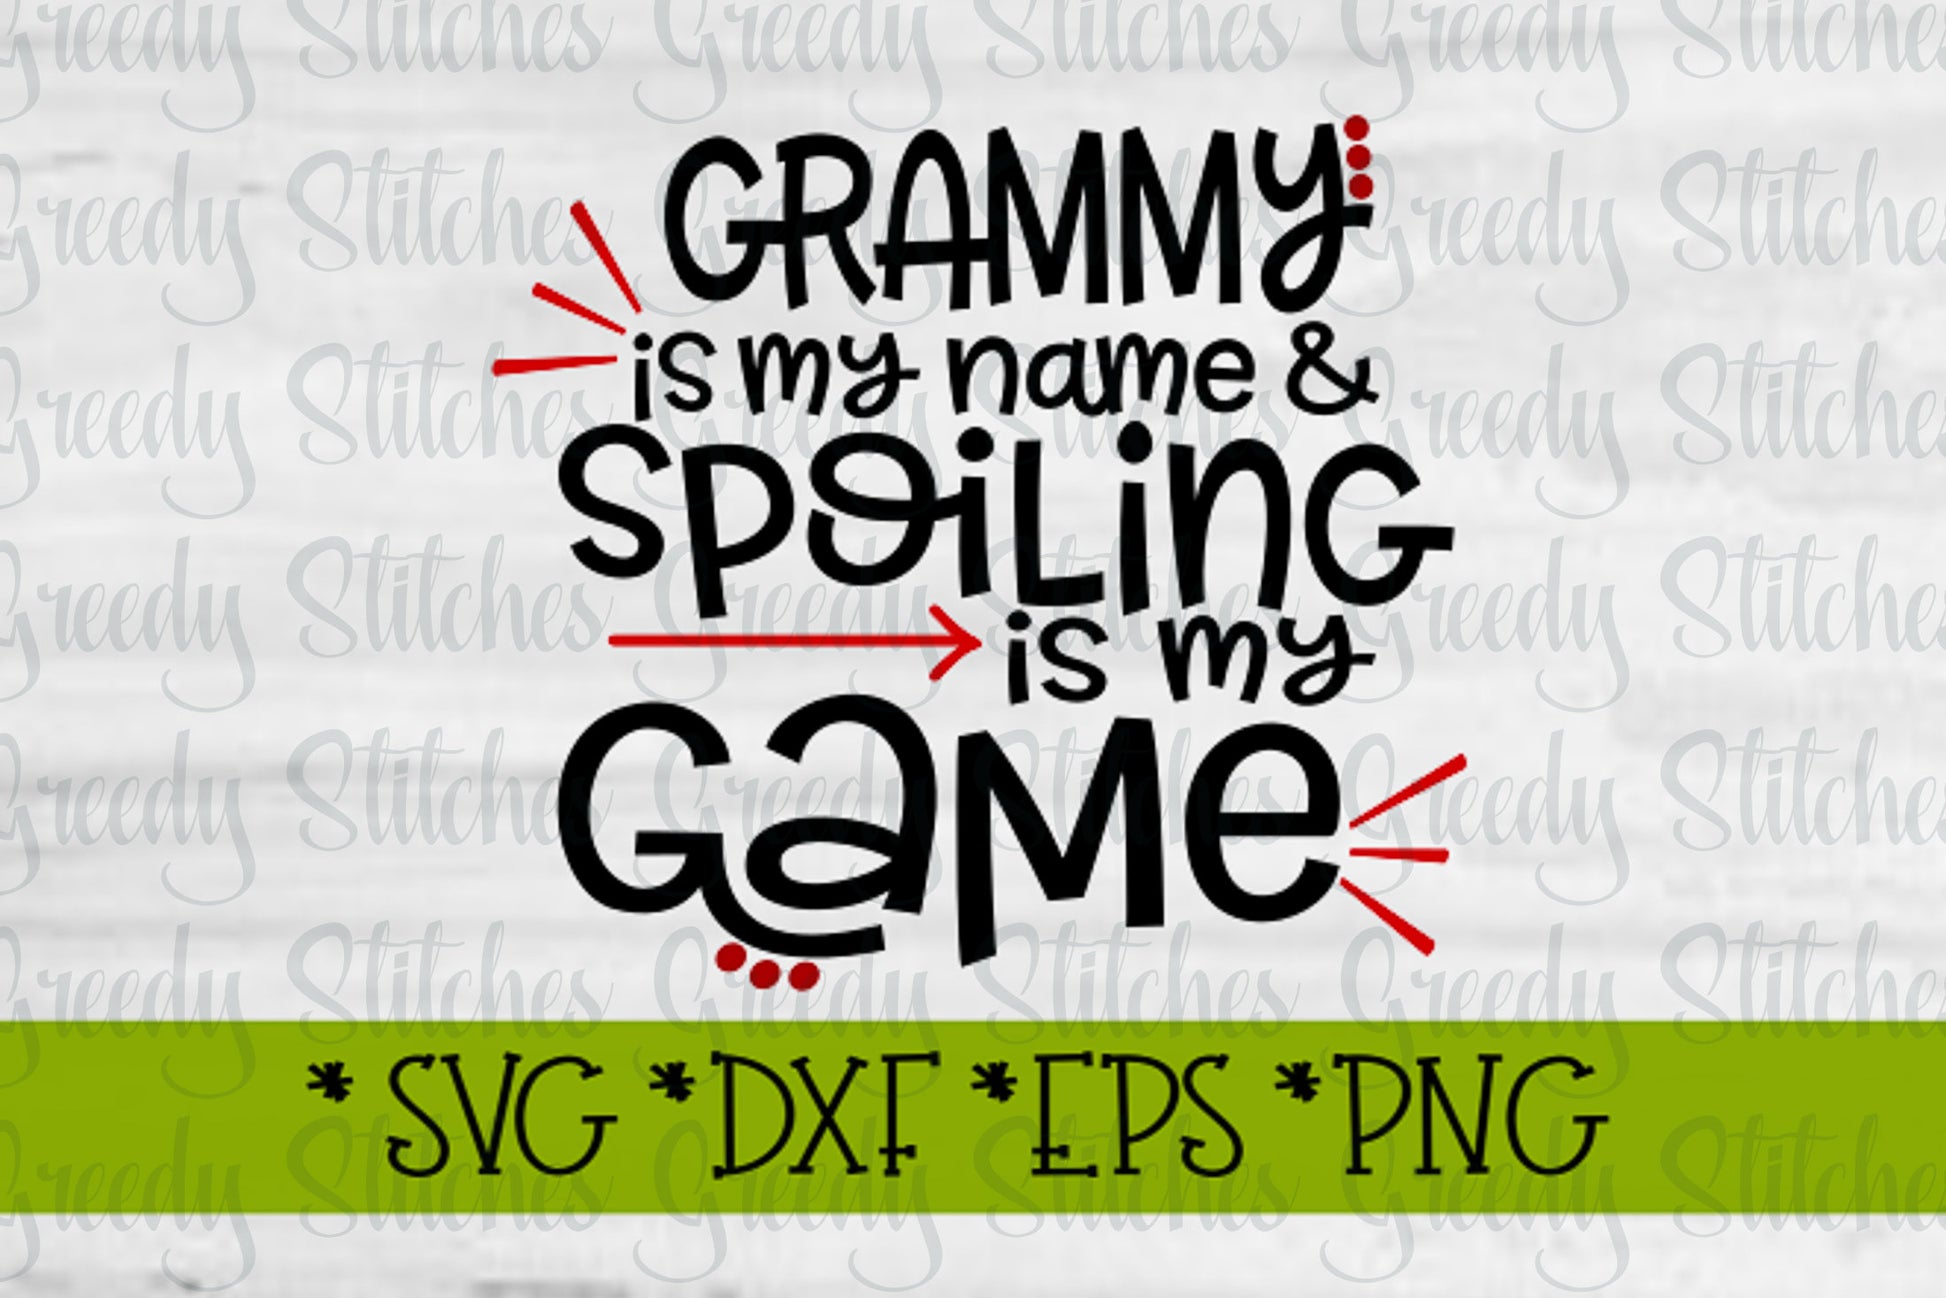 Mother&#39;s Day | Grammy Is My Name & Spoiling Is My Game svg, dxf, eps, png. Grammy SVG | Grammy Is Loved SVG | Instant Download Cut File.